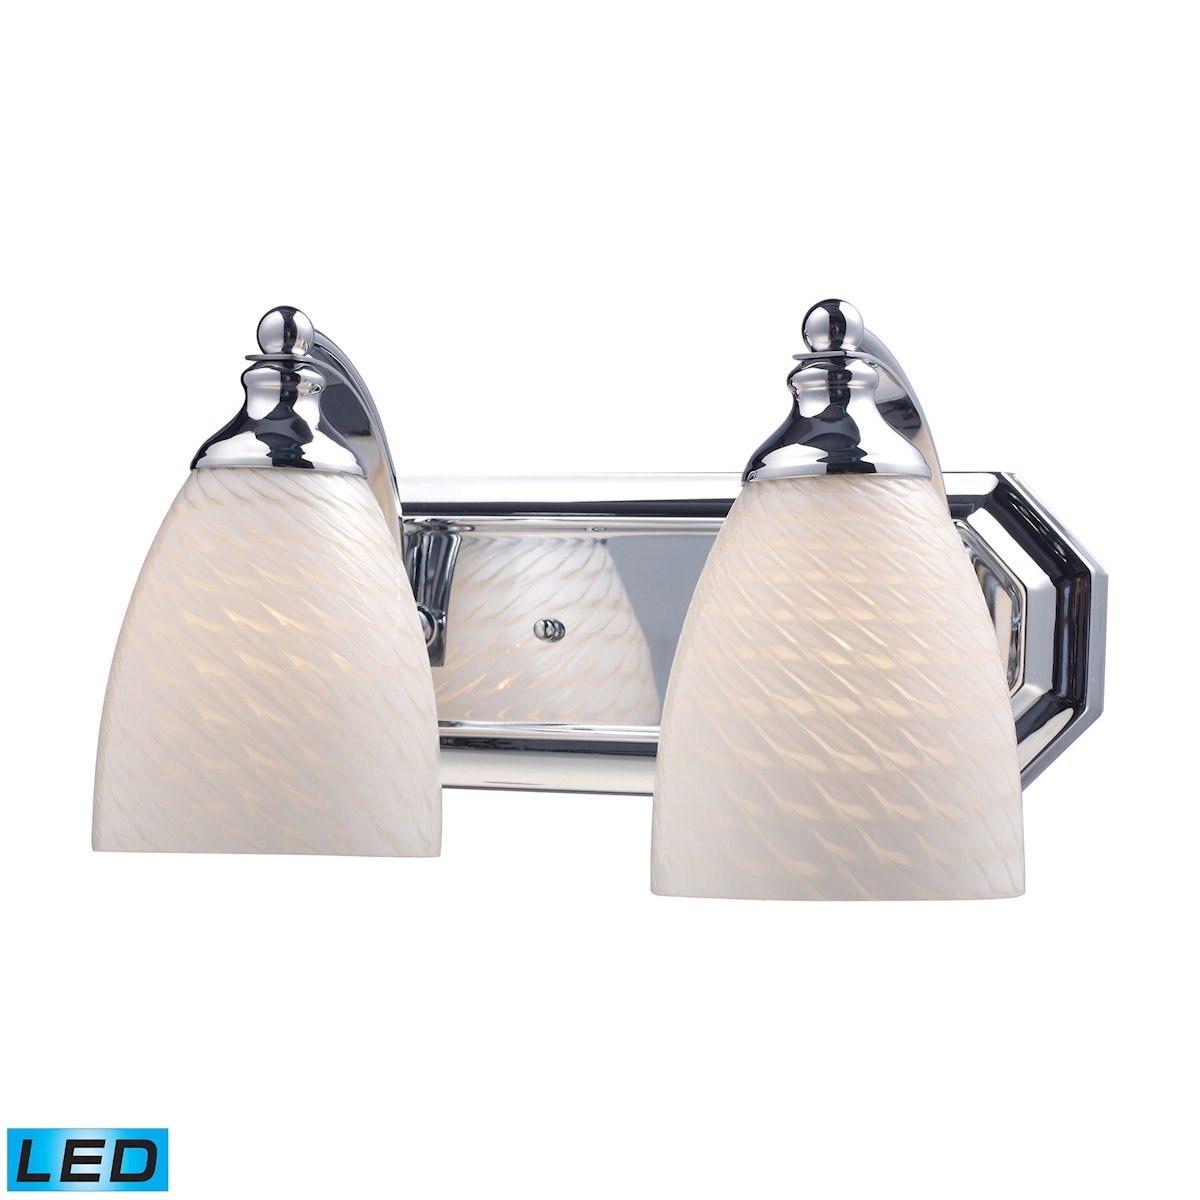 Bath And Spa 2 Light LED Vanity In Polished Chrome And White Swirl Glass Wall Elk Lighting 